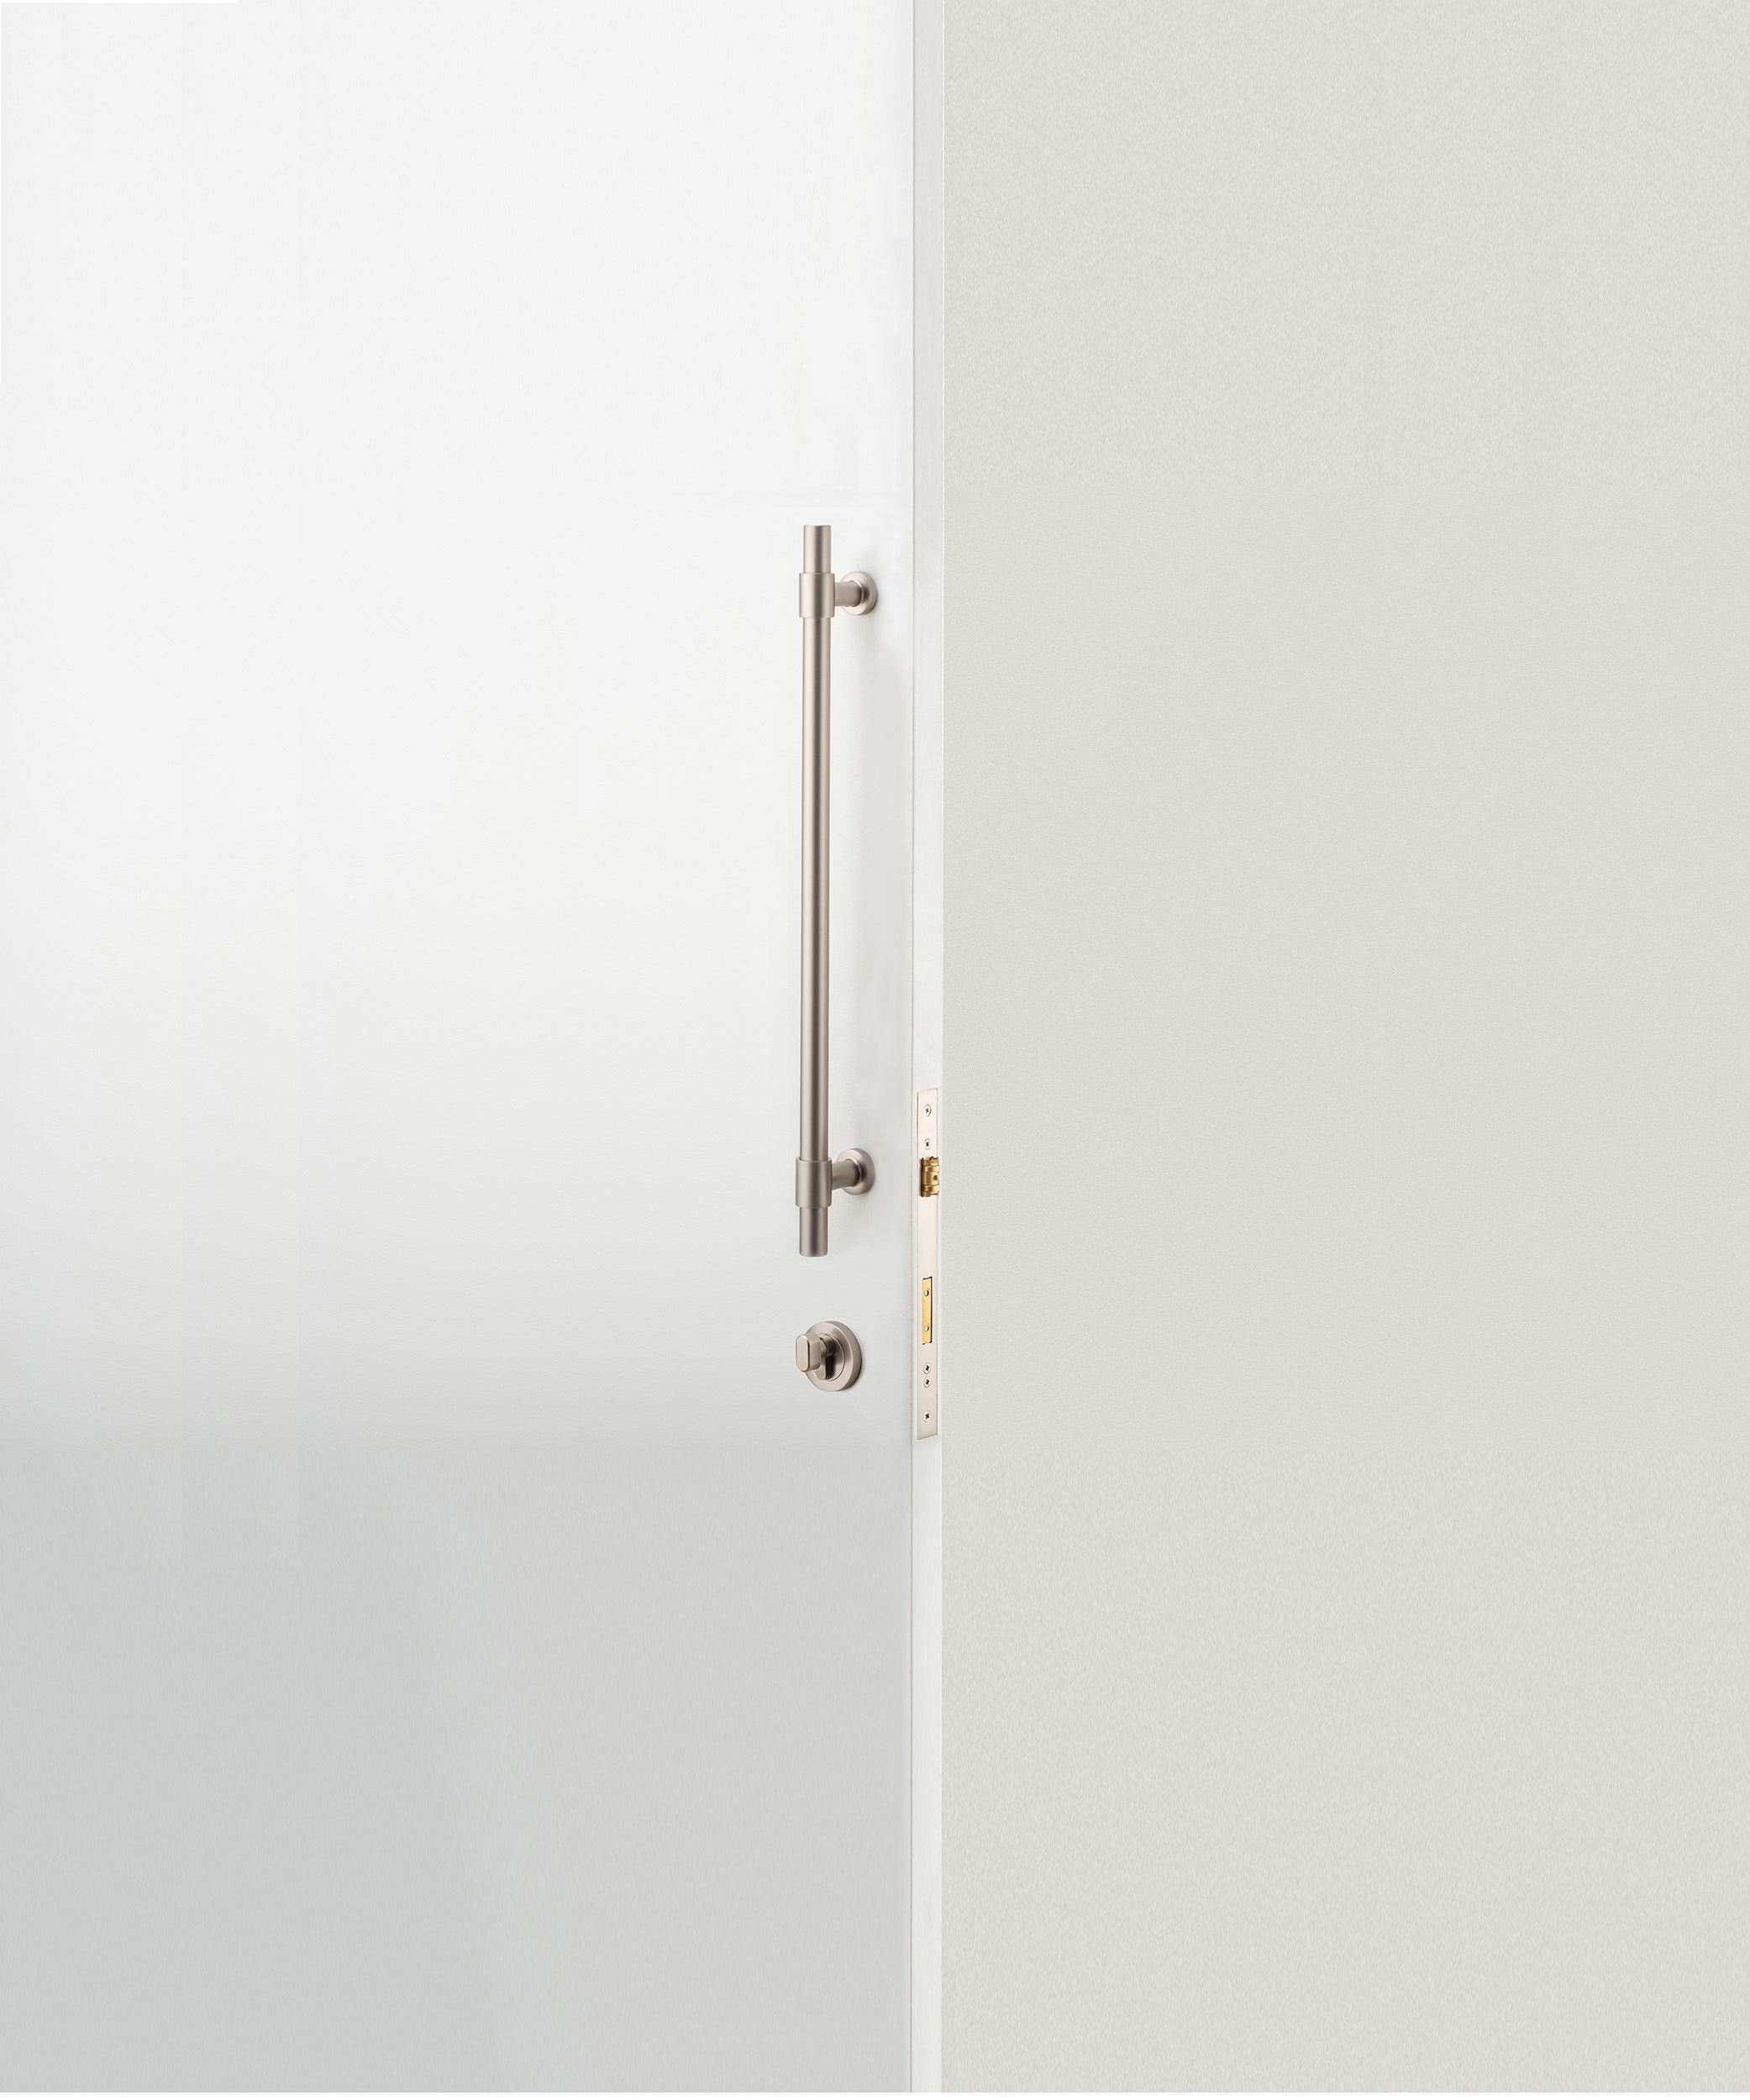 0484KENTR60KT - Berlin Pull Handle - 600mm Entrance Kit with Separate High Security Lock - Polished Chrome - Entrance